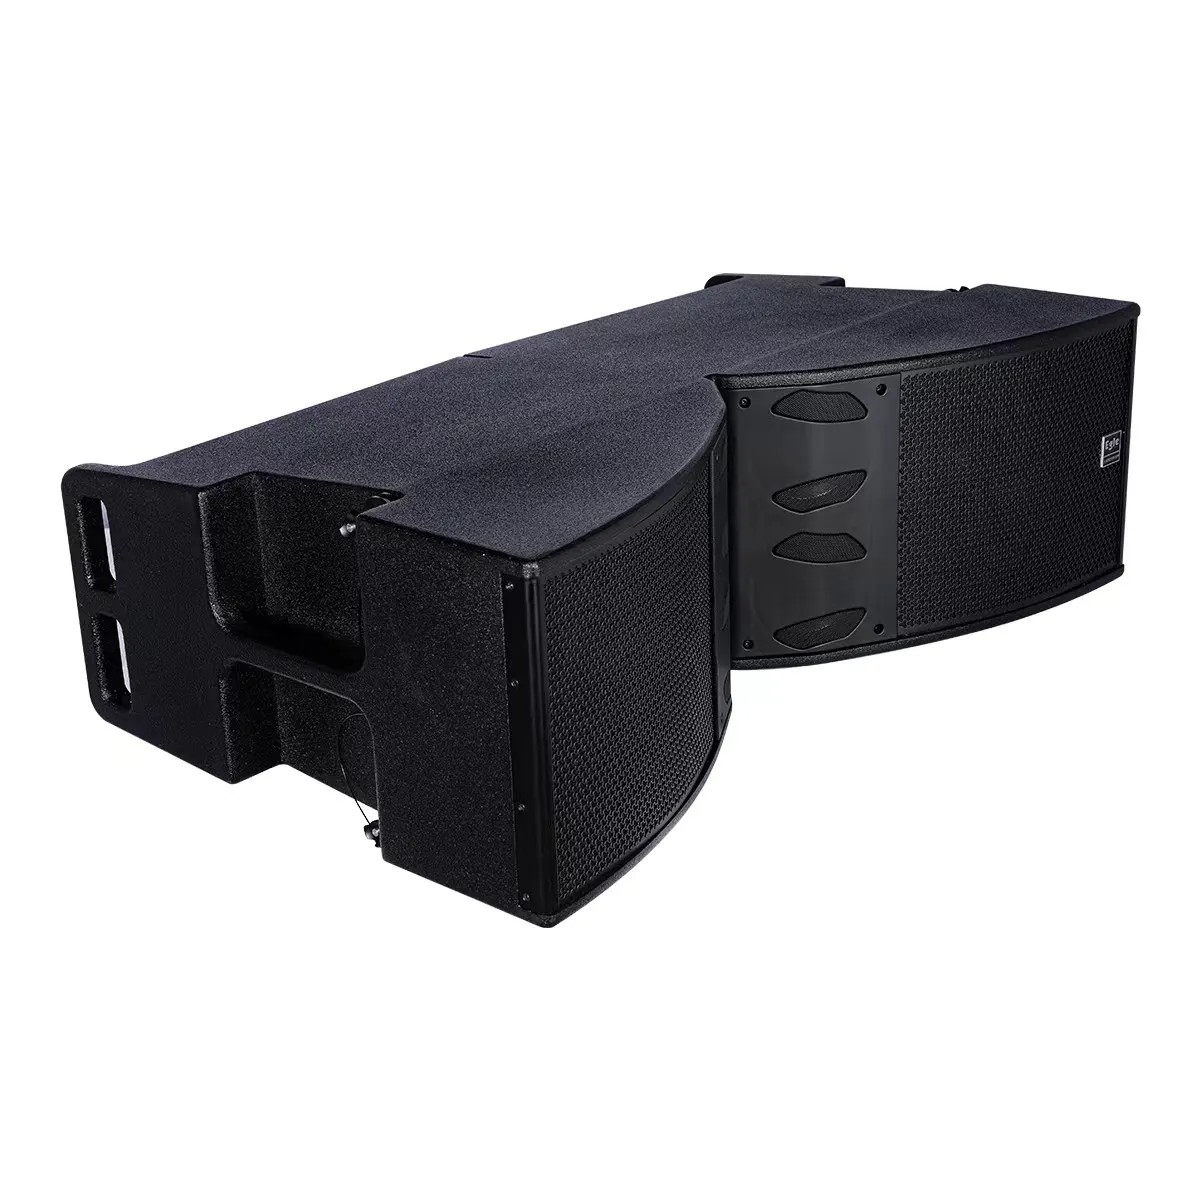 Dual 10 Inch professional Line Array speaker system Complete Set Line Array Speaker System for Stage Party Audio